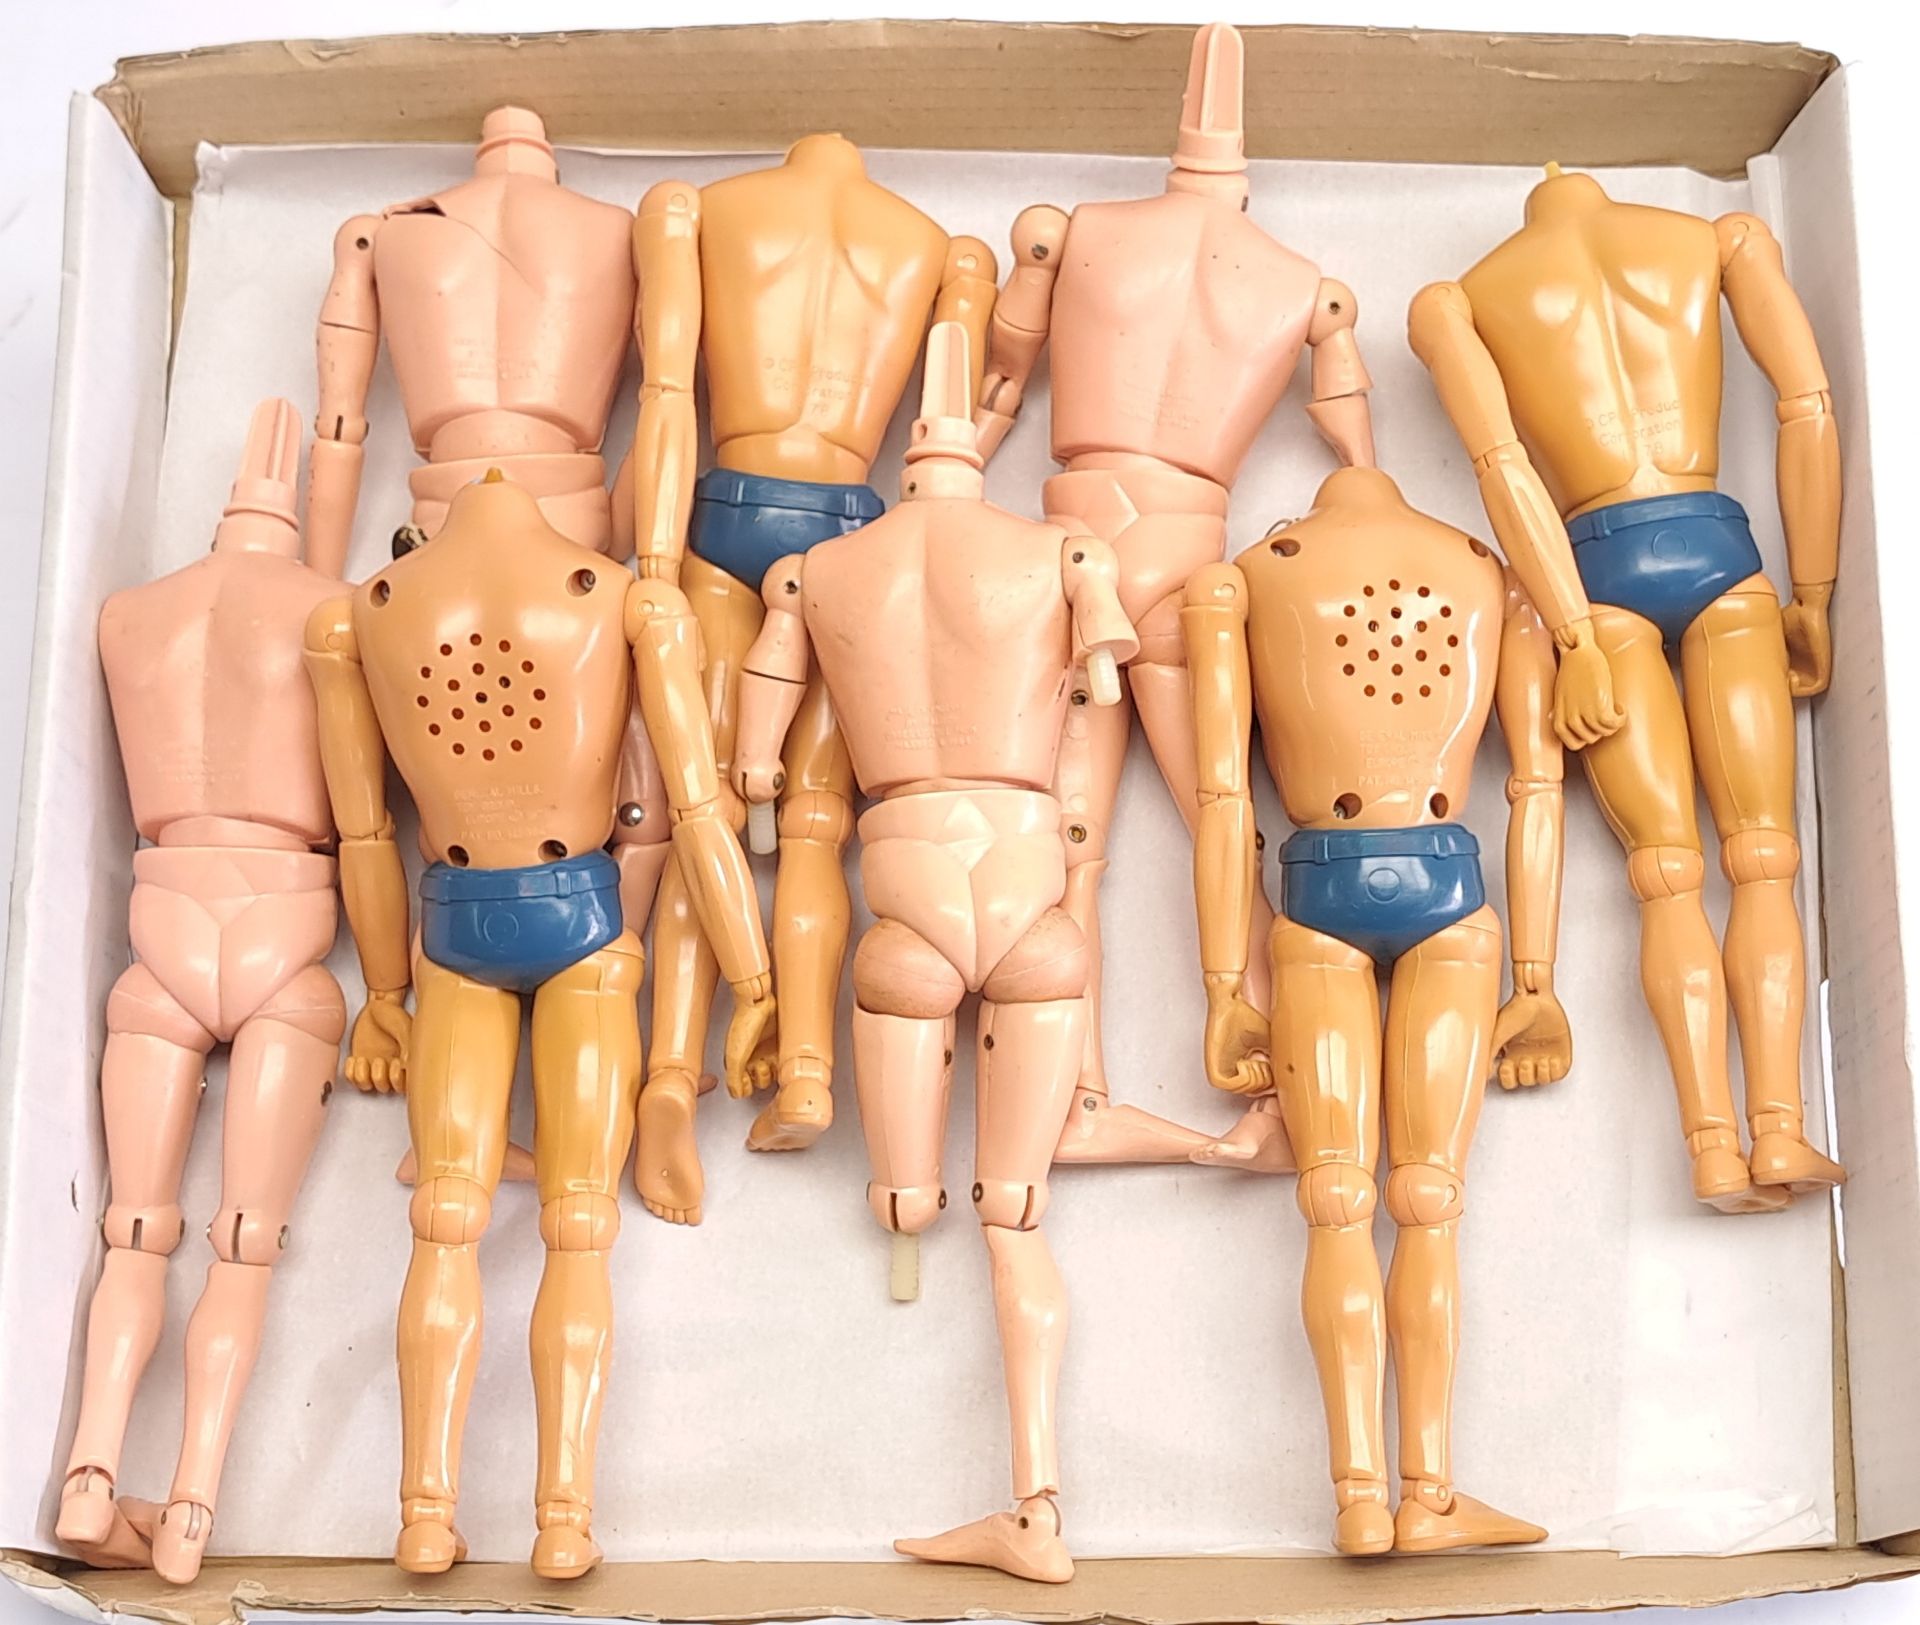 Palitoy Action Man Vintage an unboxed group of Figures / Undressed - all are missing heads, some ...